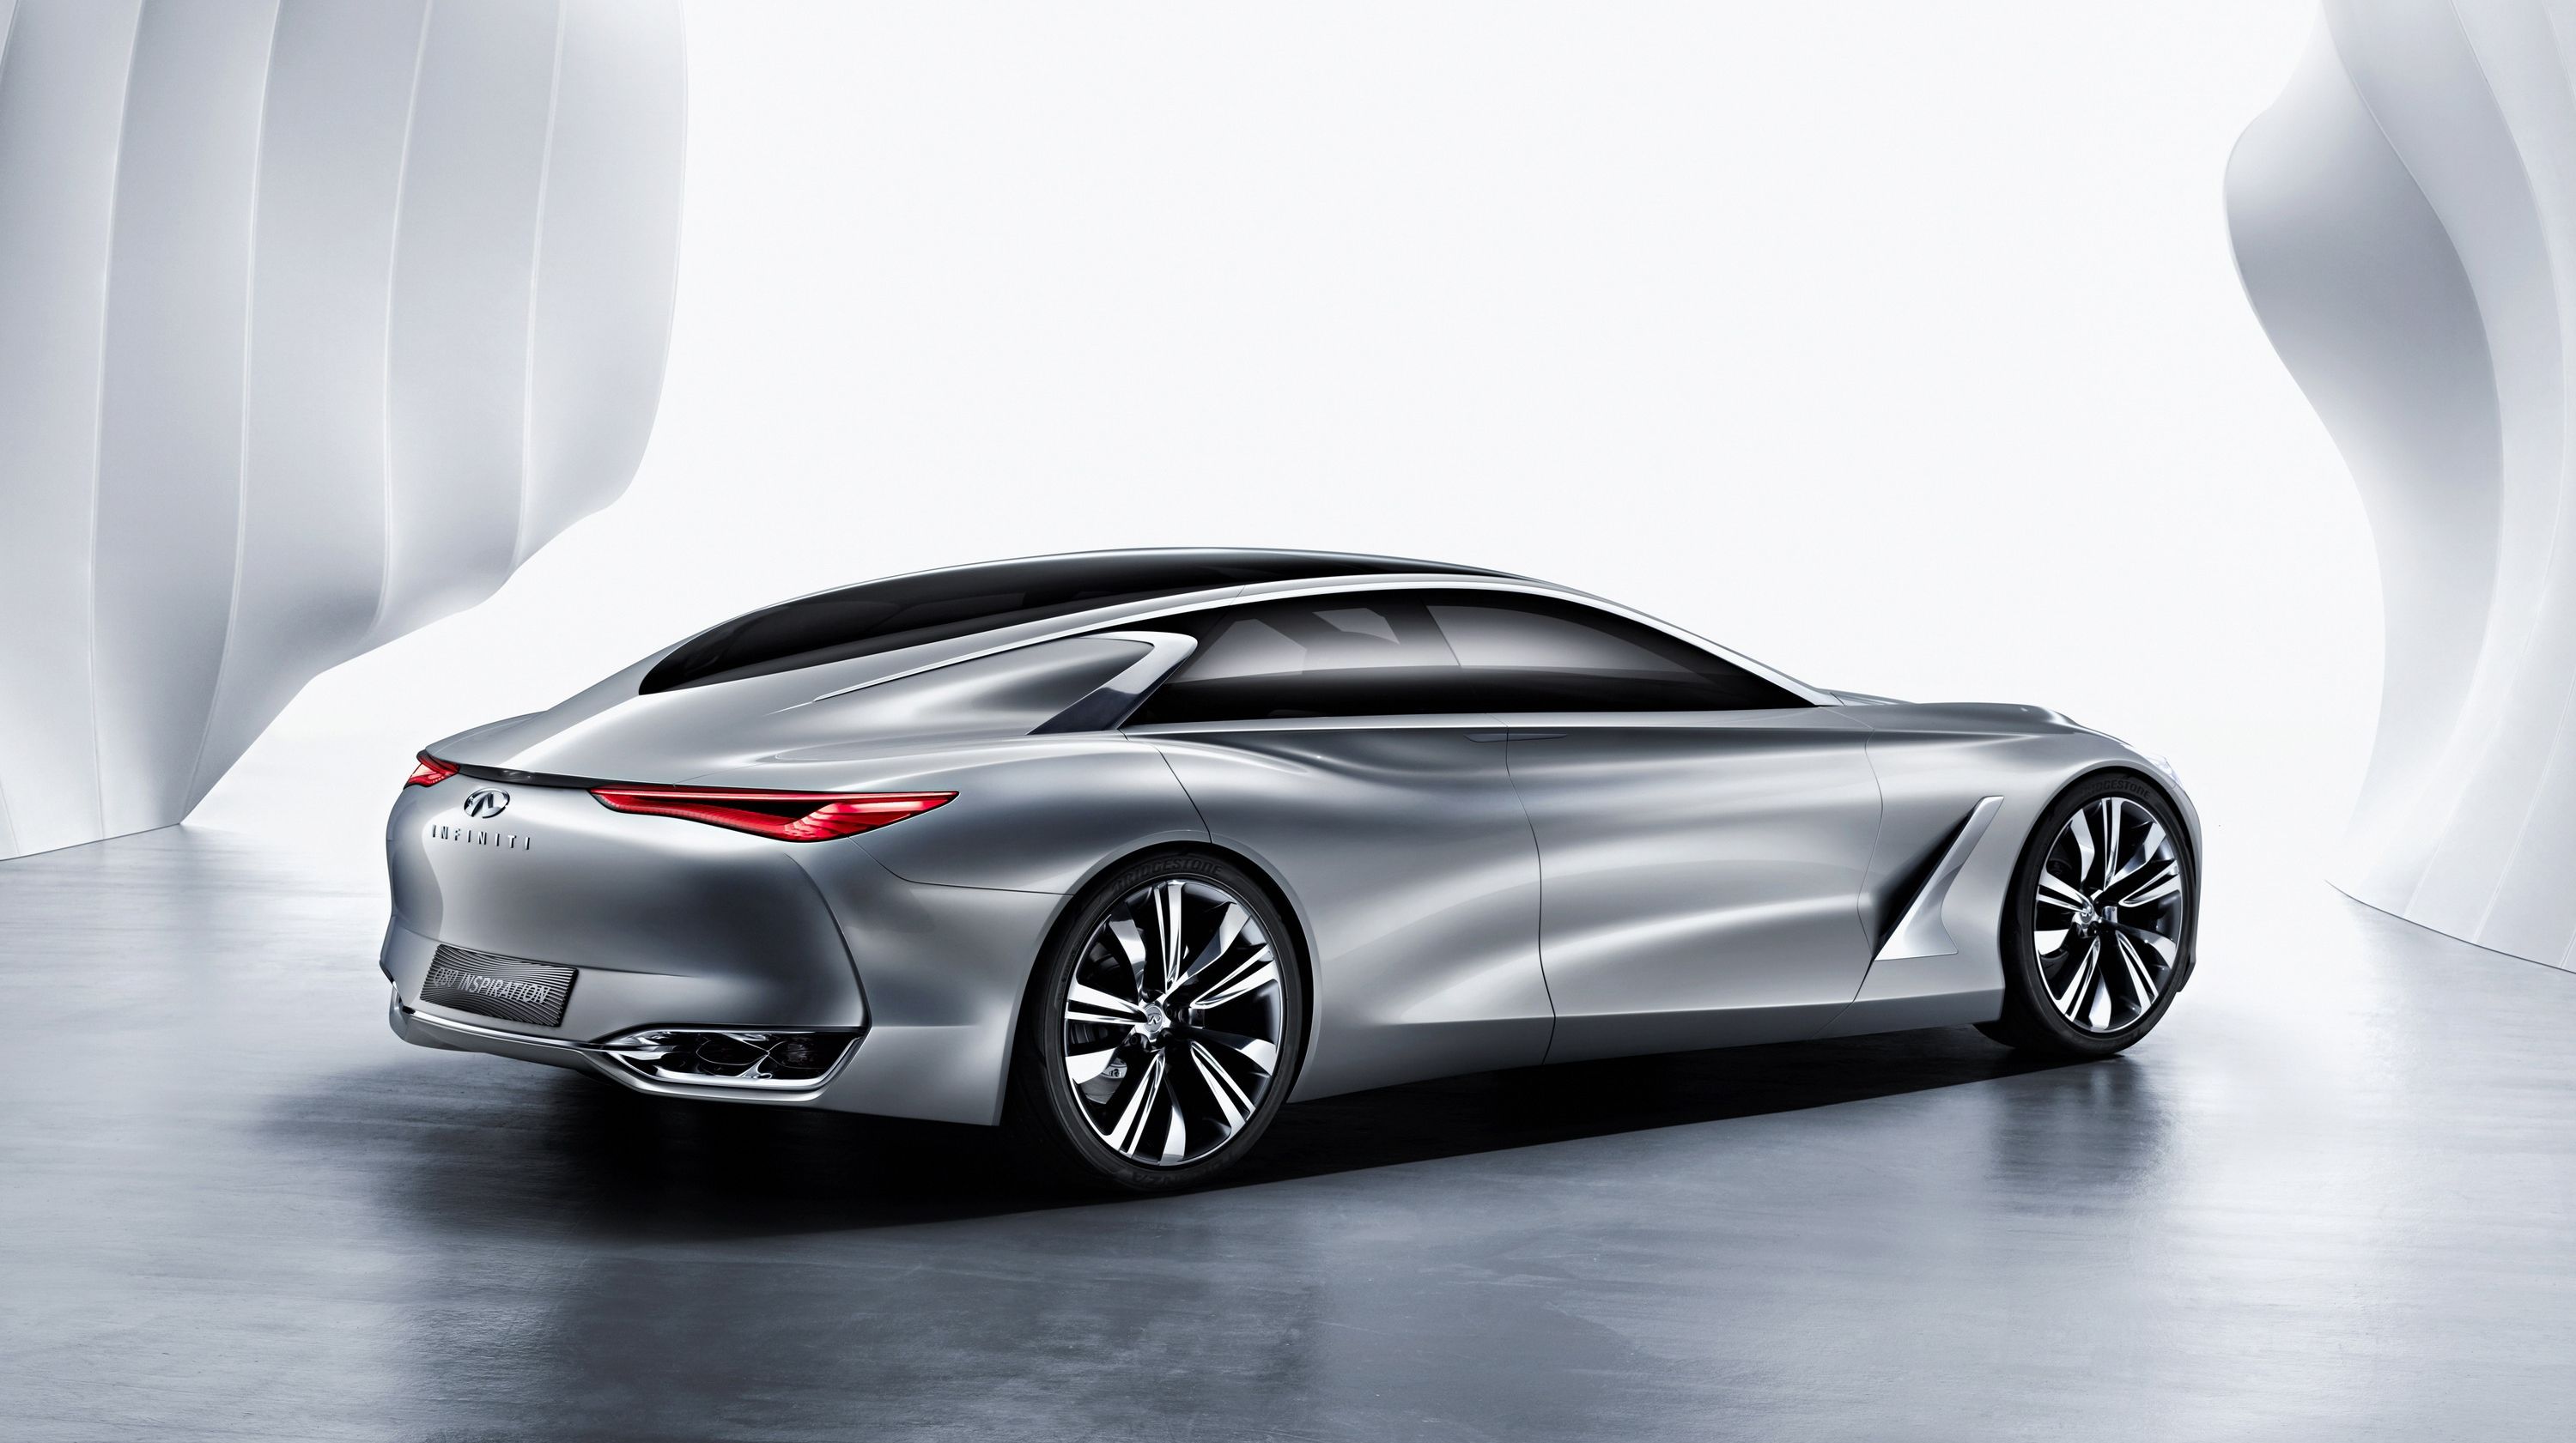  The Q80 Inspiration is absolutely stunning, but how much of this design can possibly make it to production?